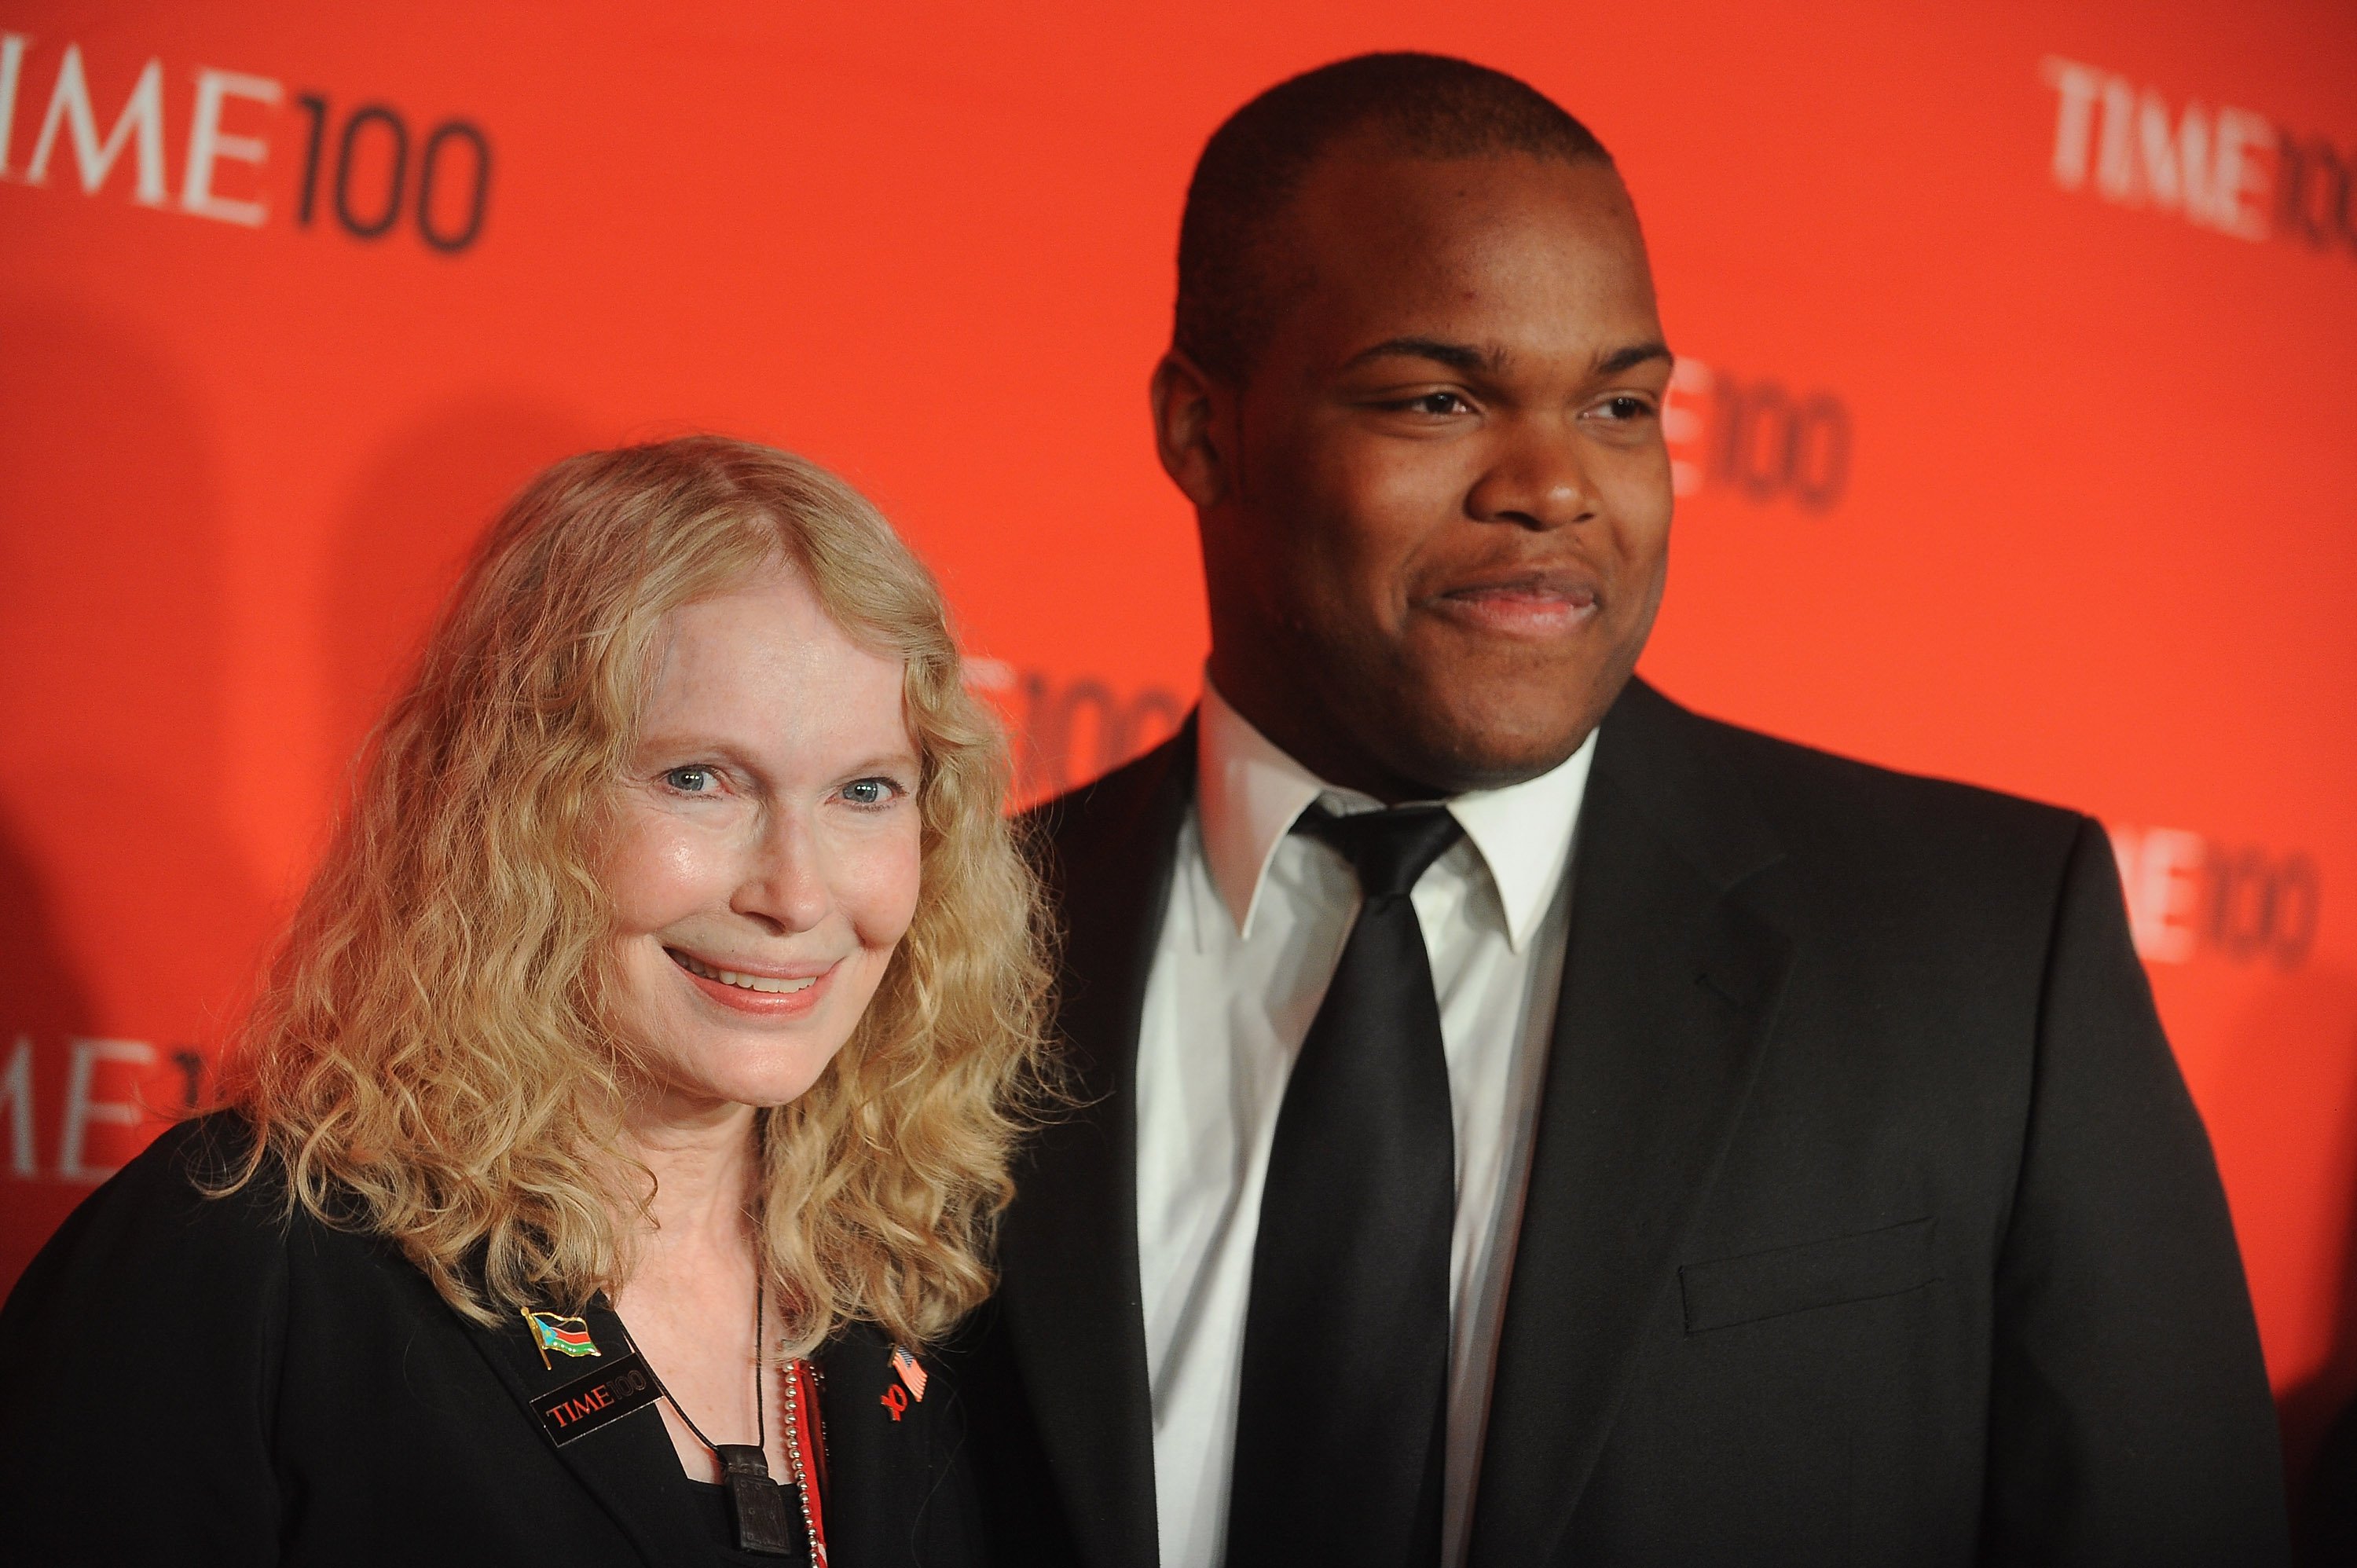 Mia Farrow and Isaiah Farrow attend the TIME 100 Gala in 2012, in New York City. | Source: Getty Images